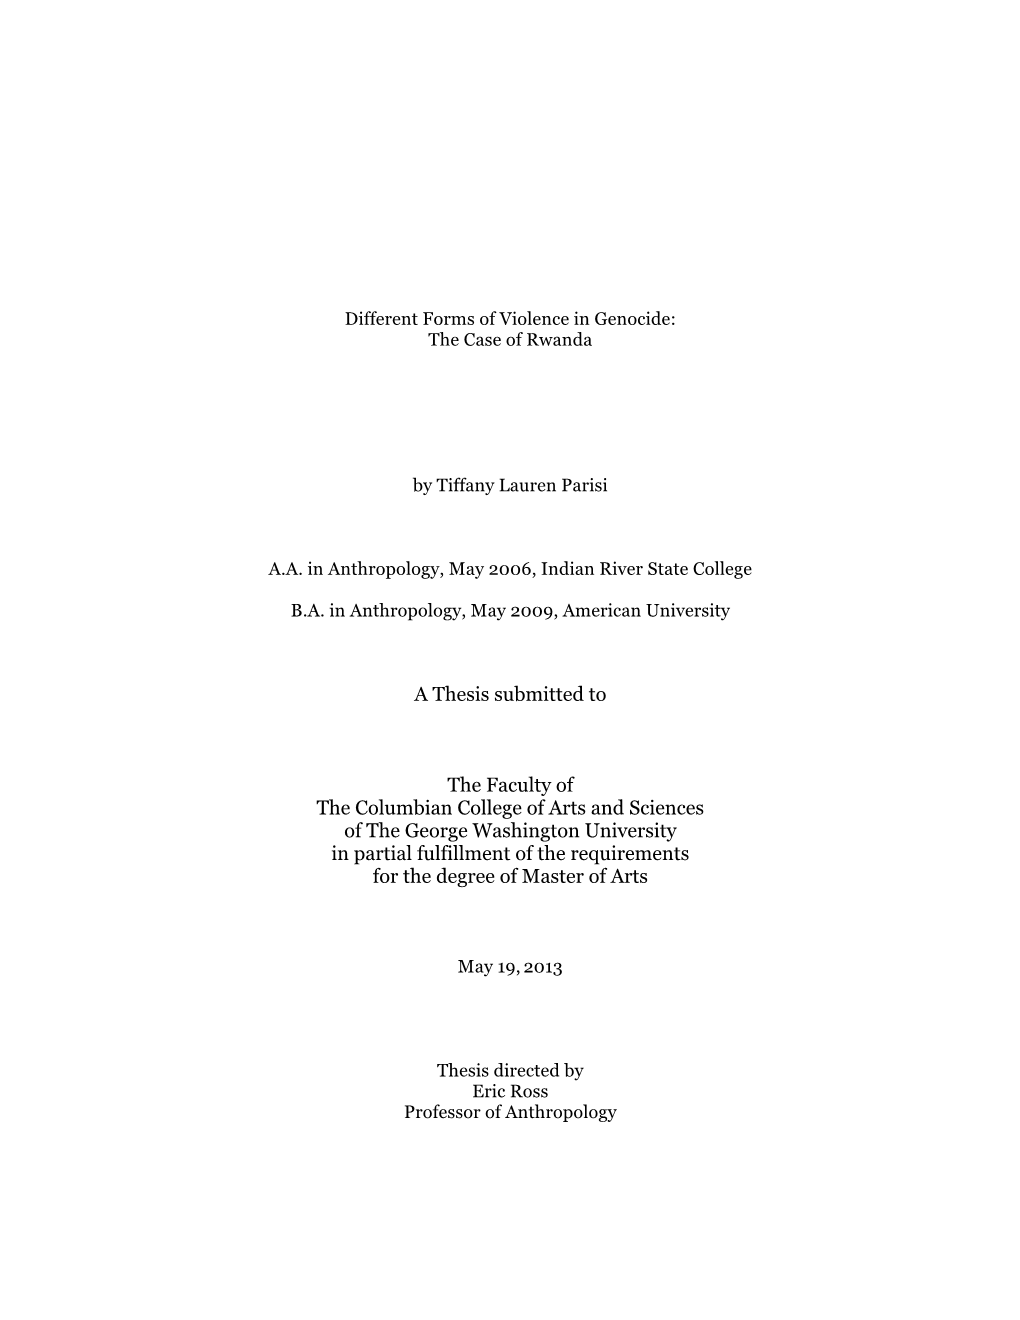 A Thesis Submitted to the Faculty of the Columbian College of Arts And